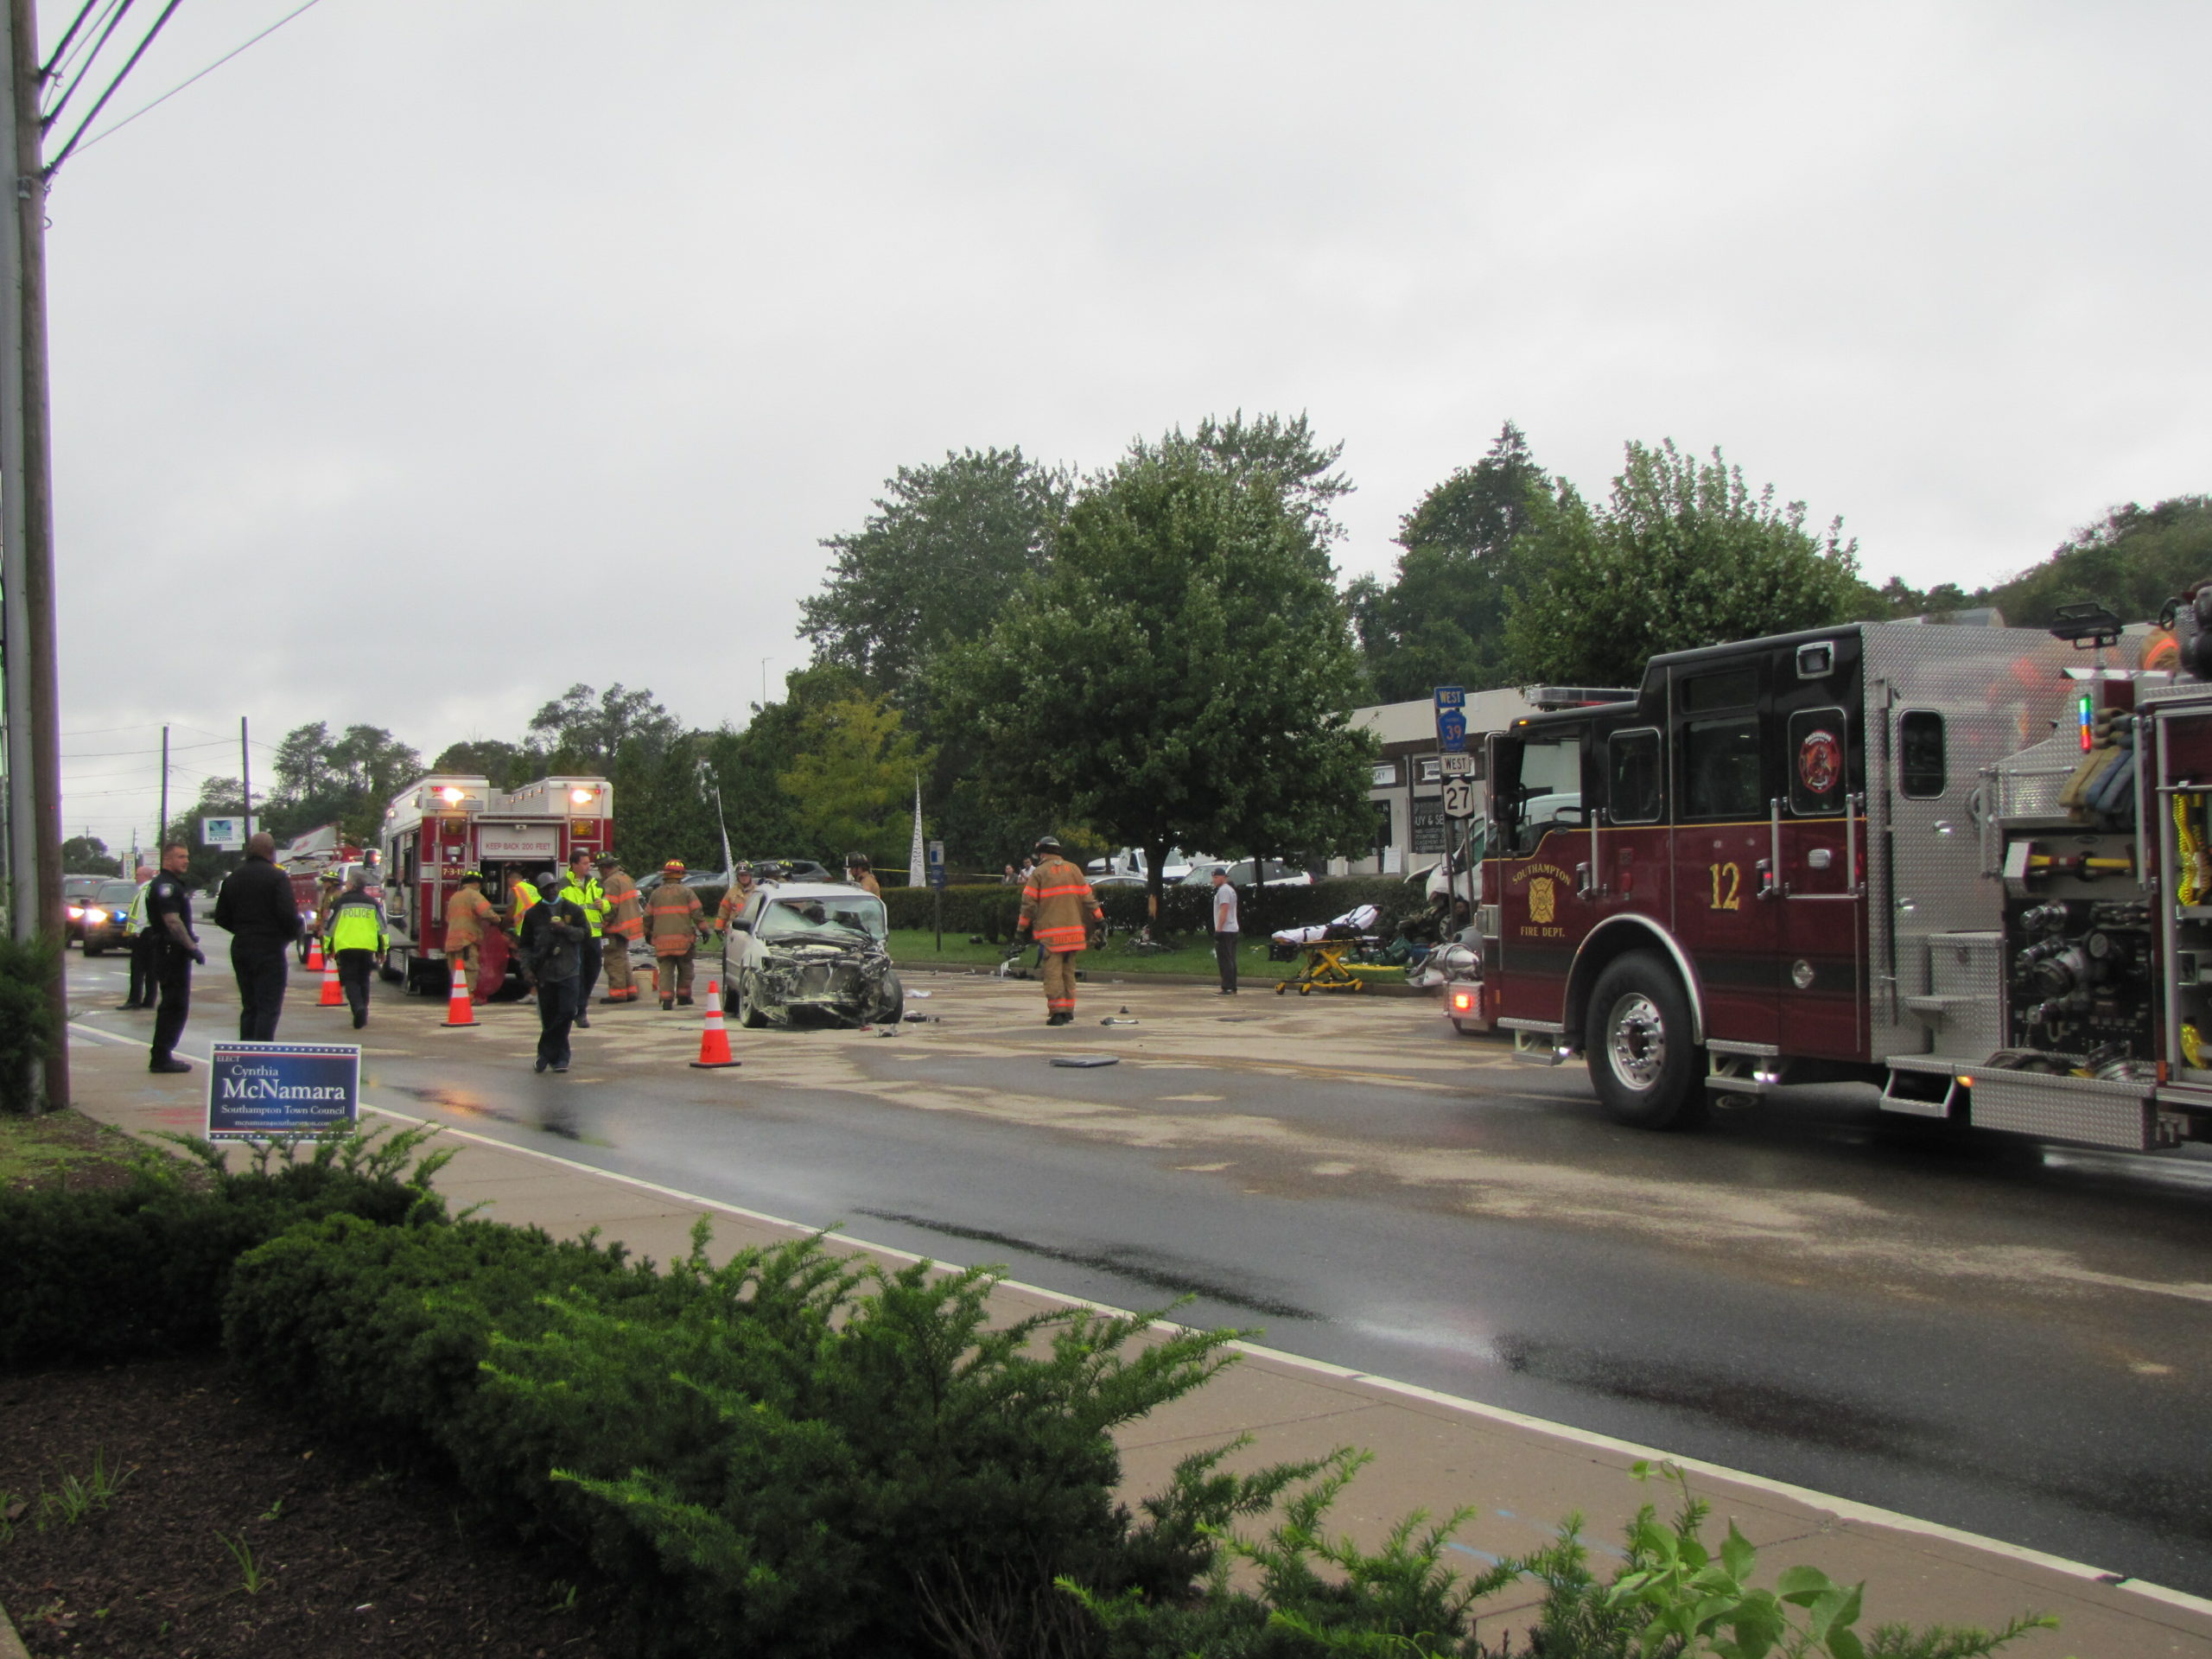 County Road 39 in Southampton was closed following the Monday morning accident.